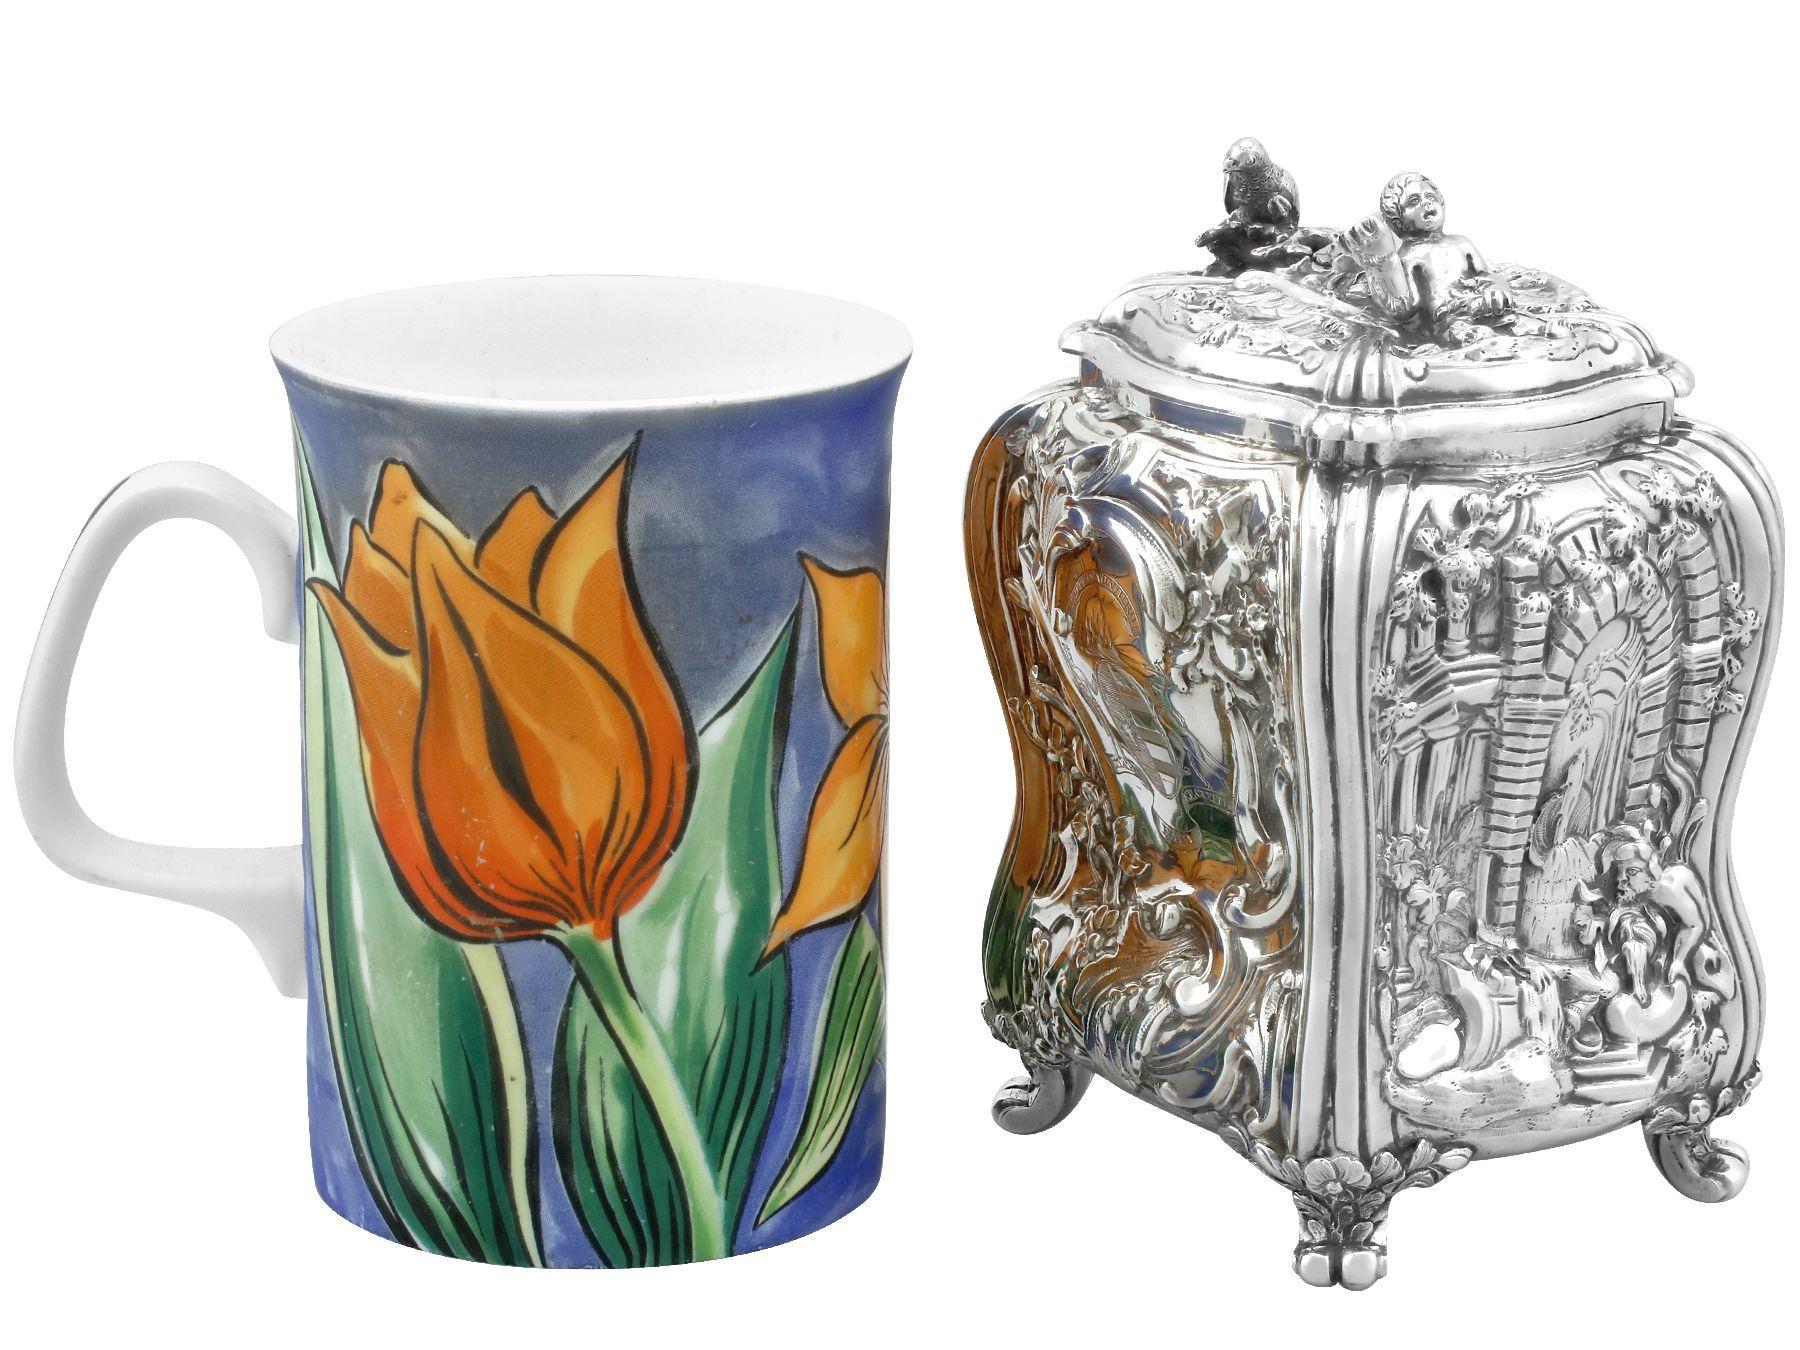 A magnificent, fine and impressive pair of antique Georgian English sterling silver tea caddies - boxed; an addition to our silver teaware collection

These magnificent, fine and impressive antique Georgian silver tea caddies each have an oblong,